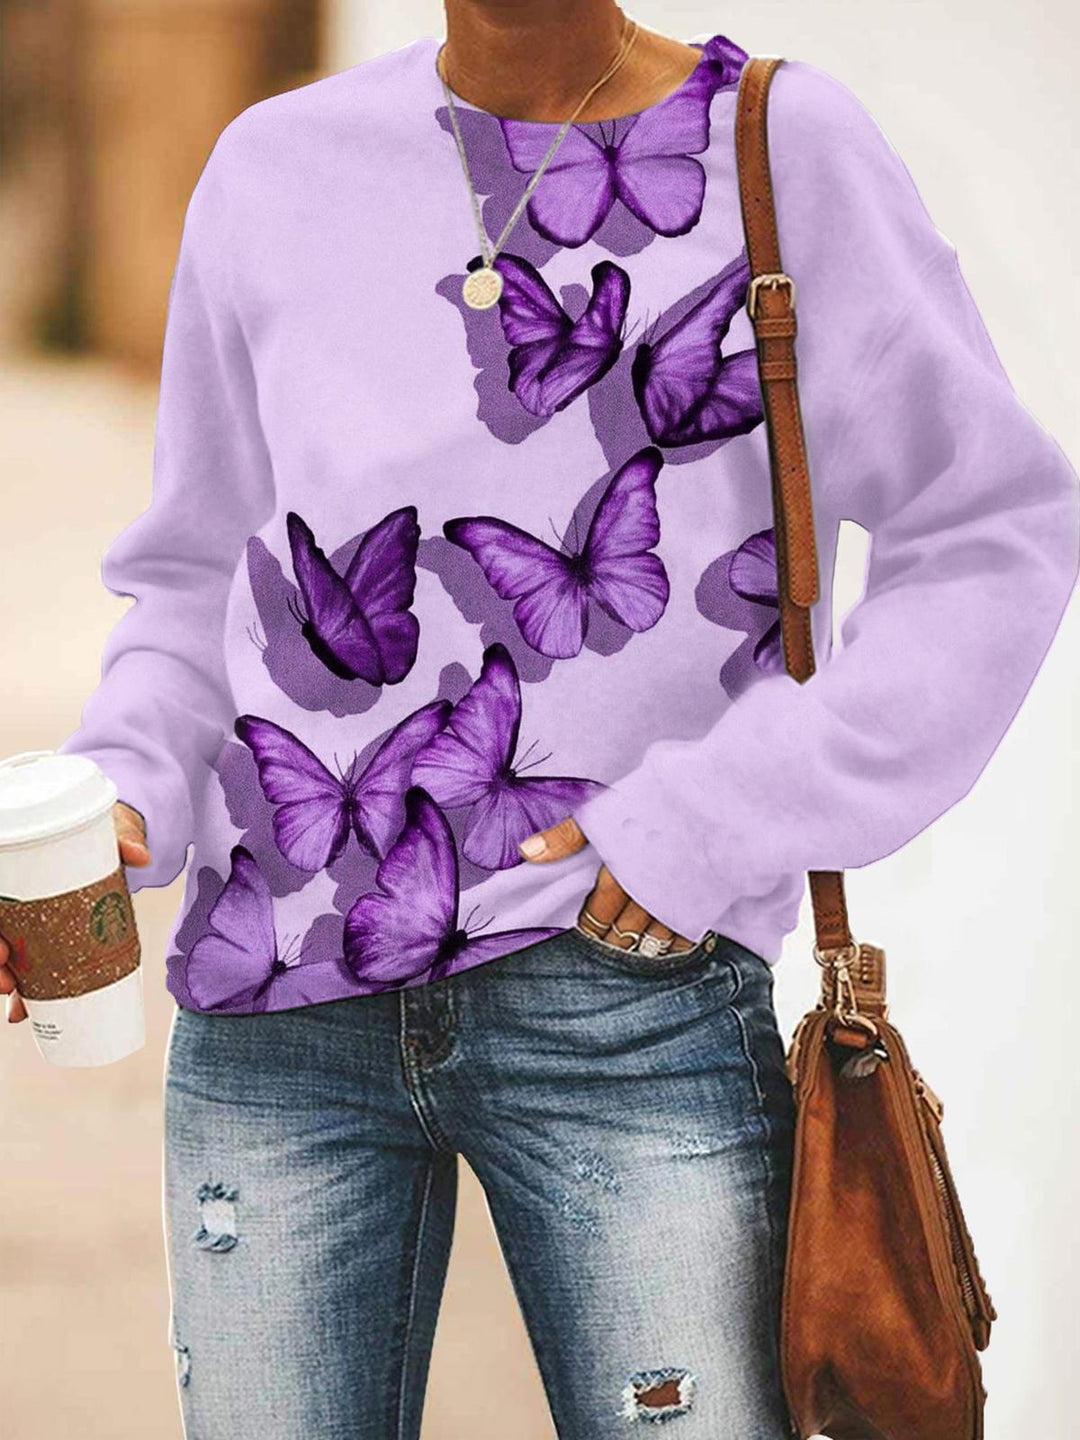 Women's Butterfly Print Round Neck Long Sleeve Top